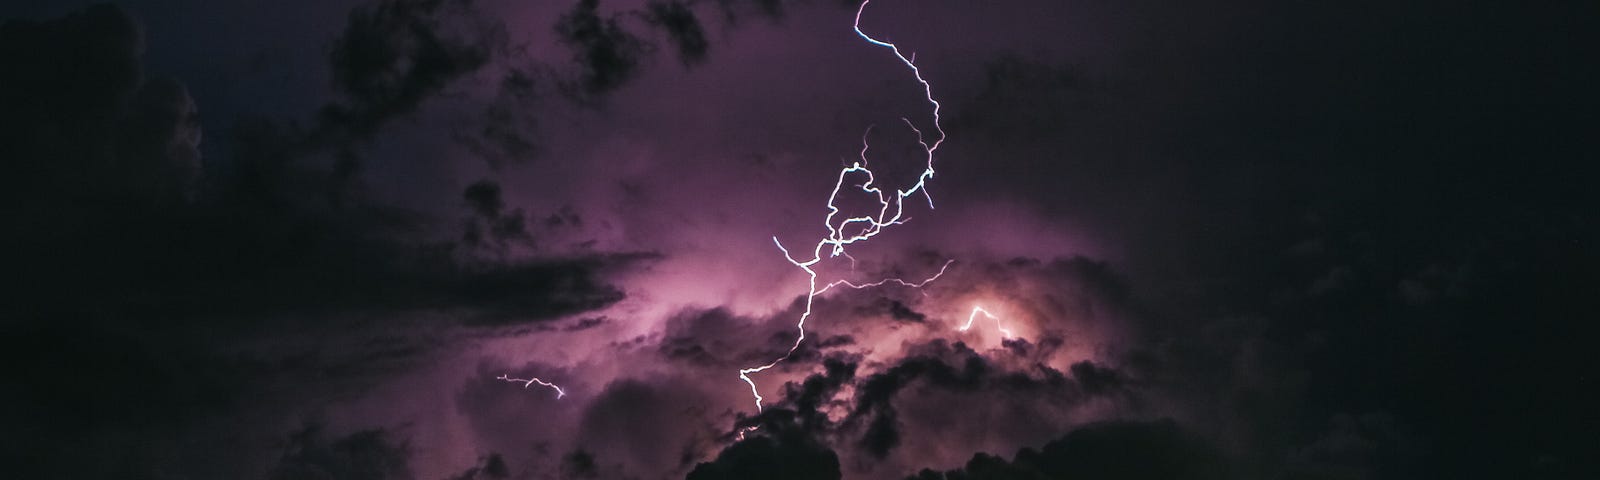 A dark sky full of clouds is lit up by a single lightning bolt in the centre of the scene.